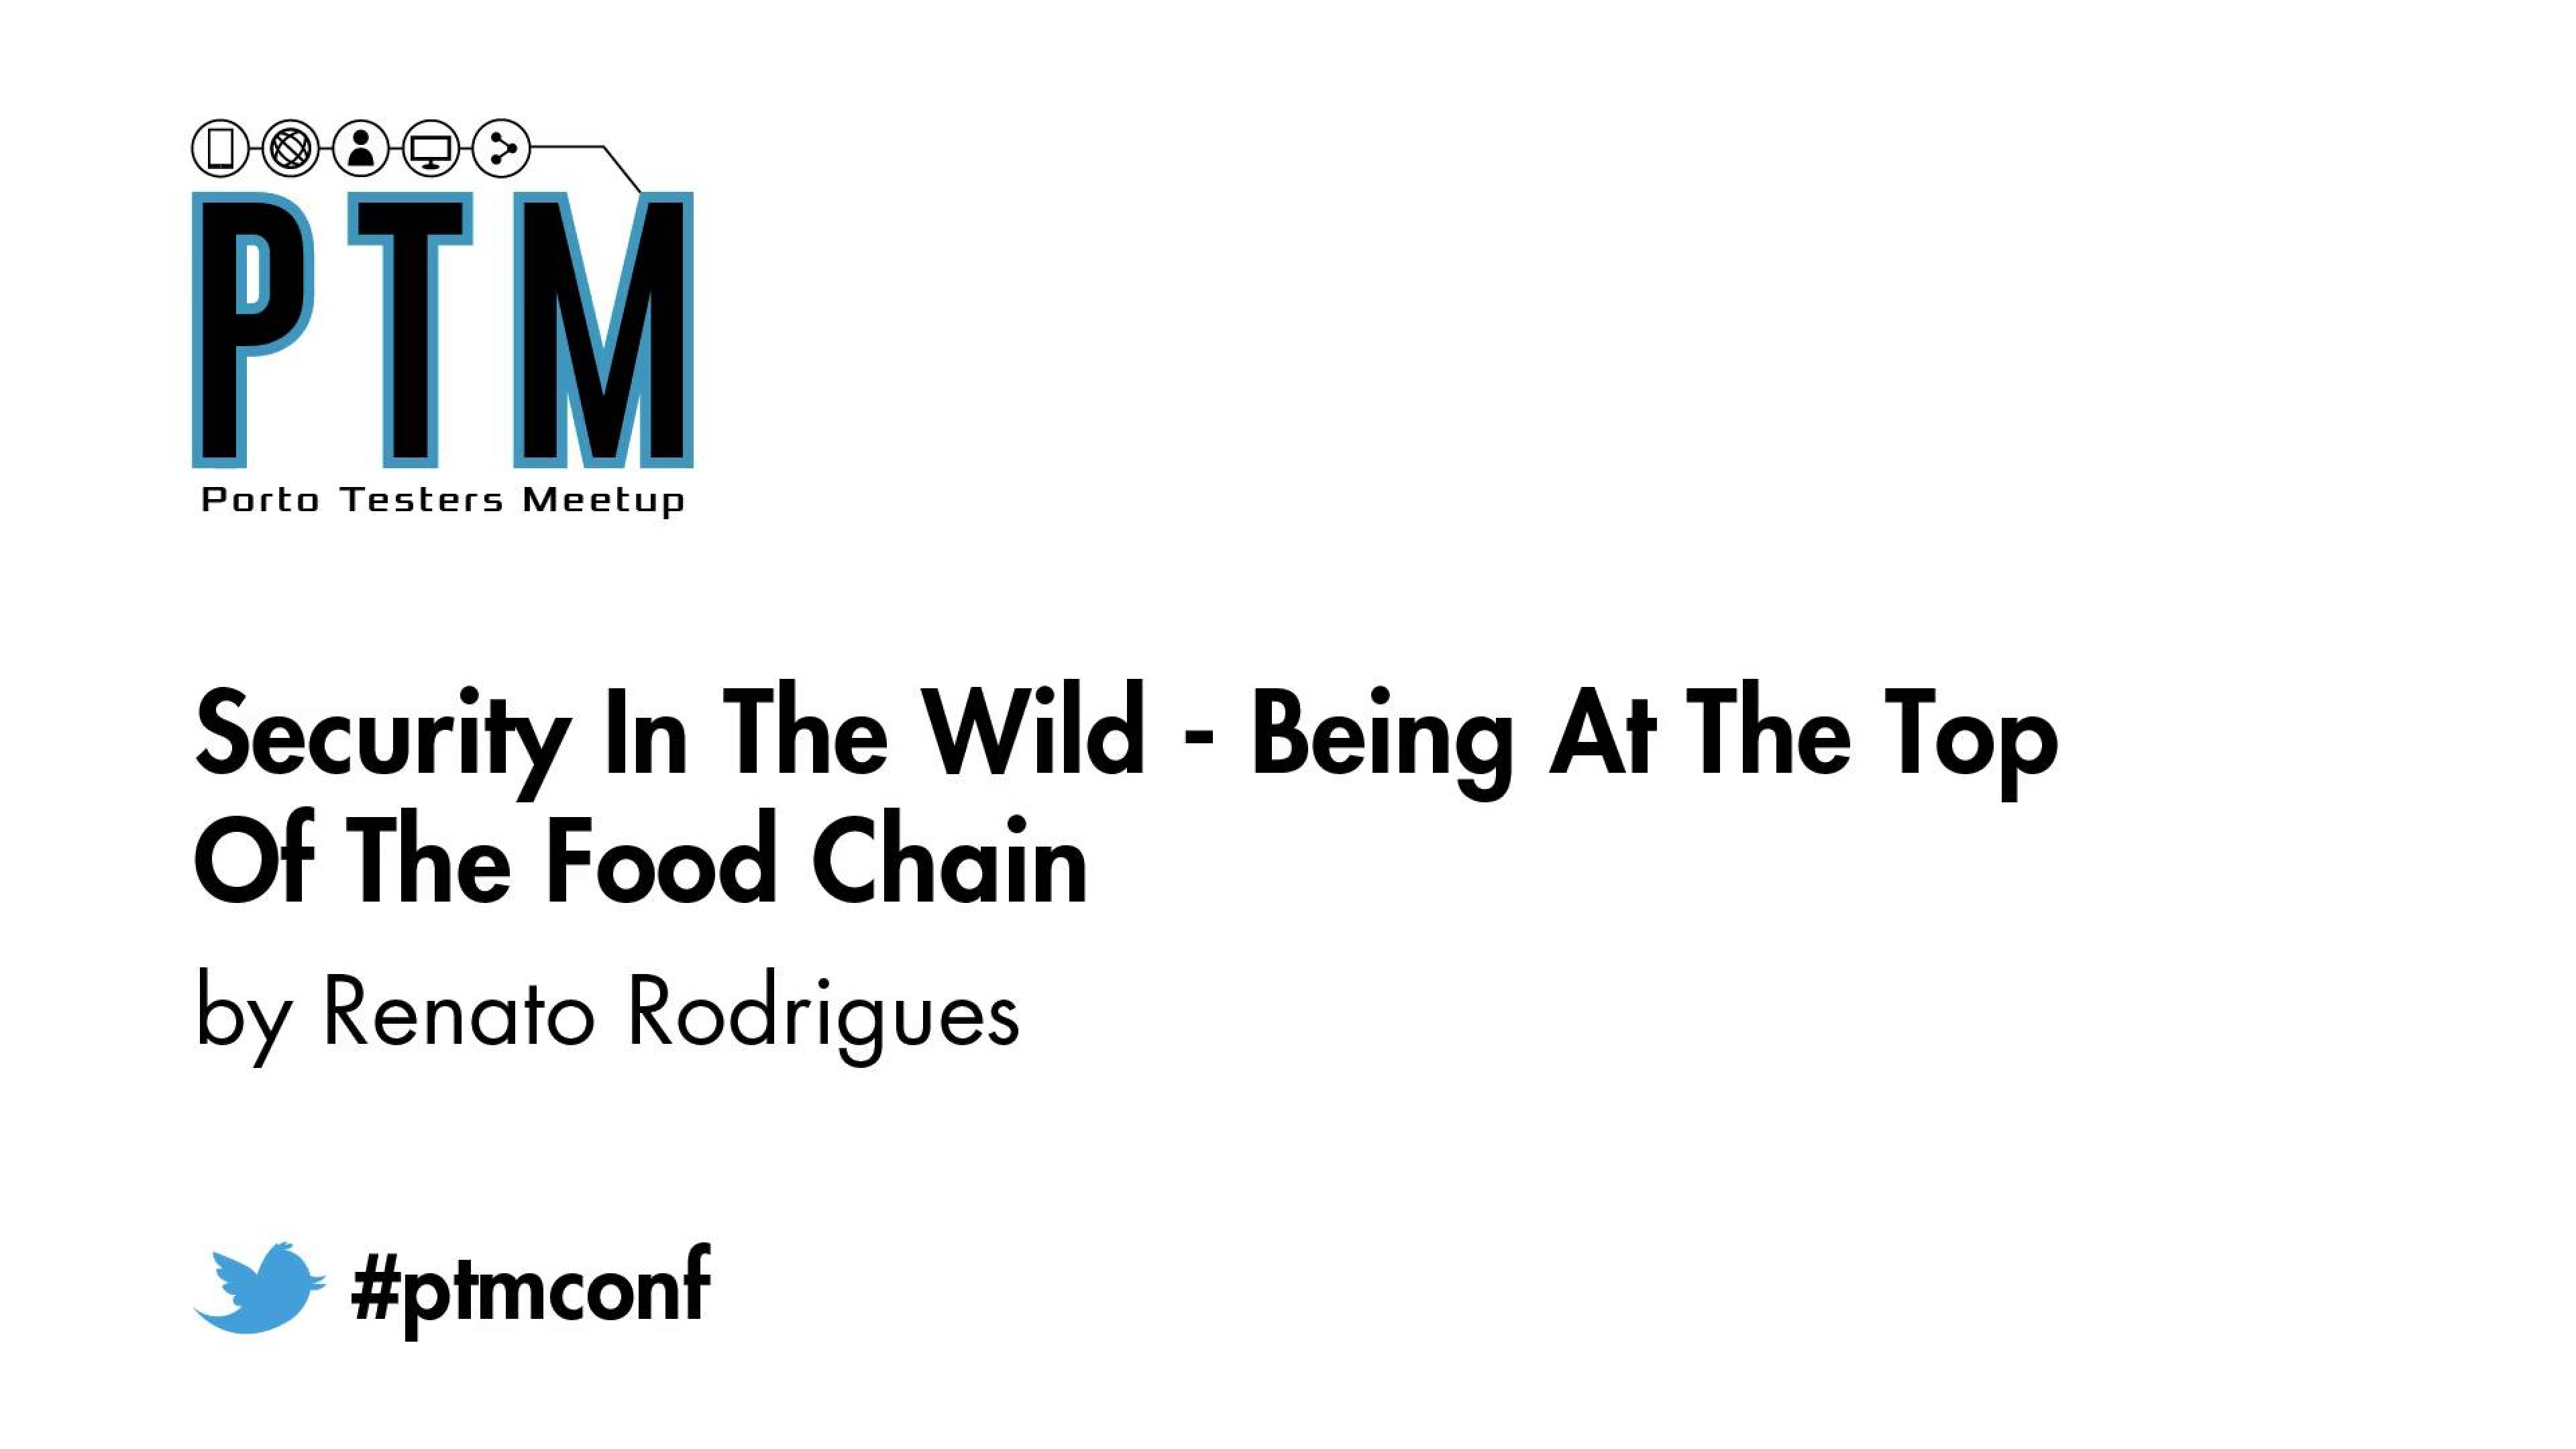 Security in the Wild: Being at the Top of the Food Chain - Renato Rodrigues